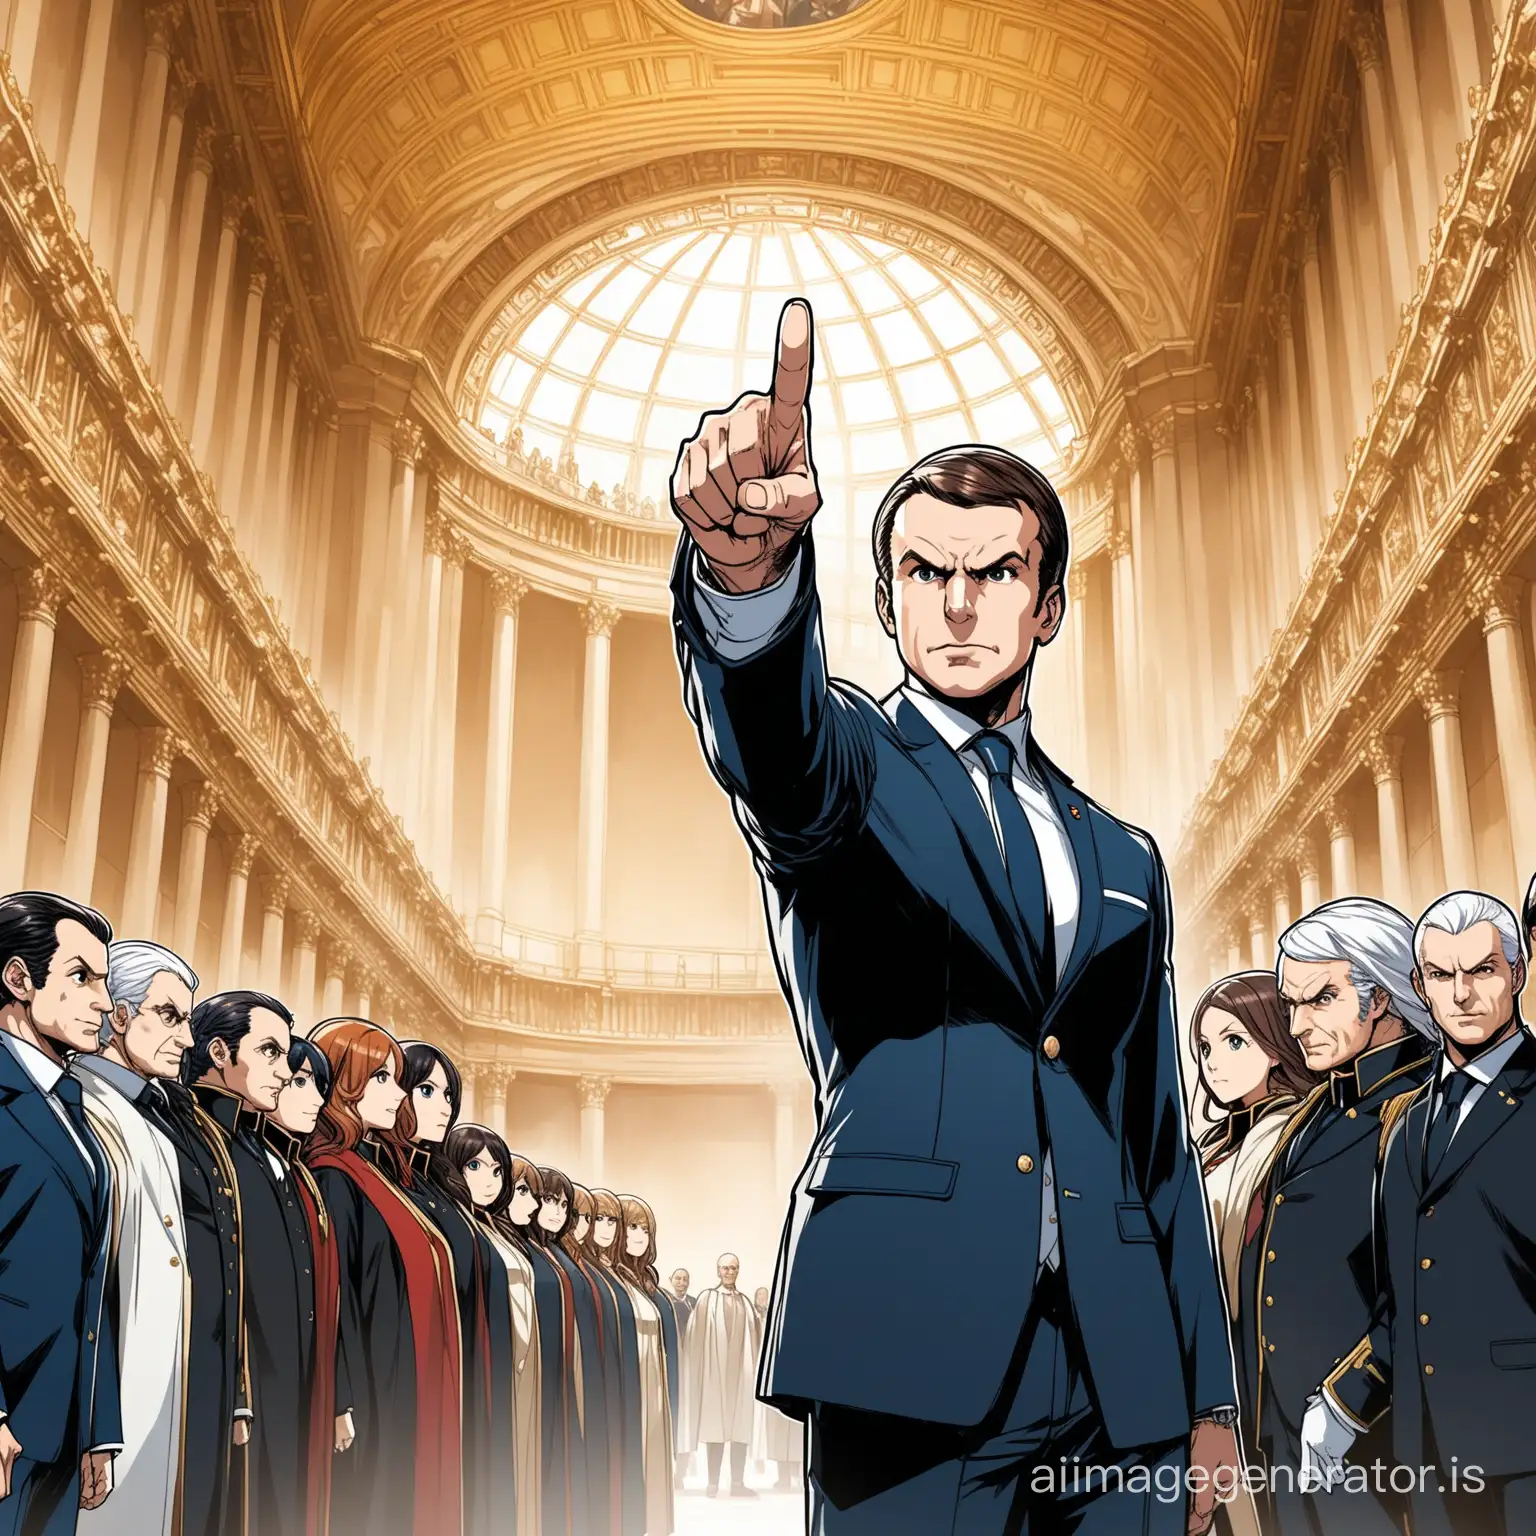 Emmanuel-Macron-Points-at-French-Museums-Surrounded-by-Classic-Judges-in-Anime-Style